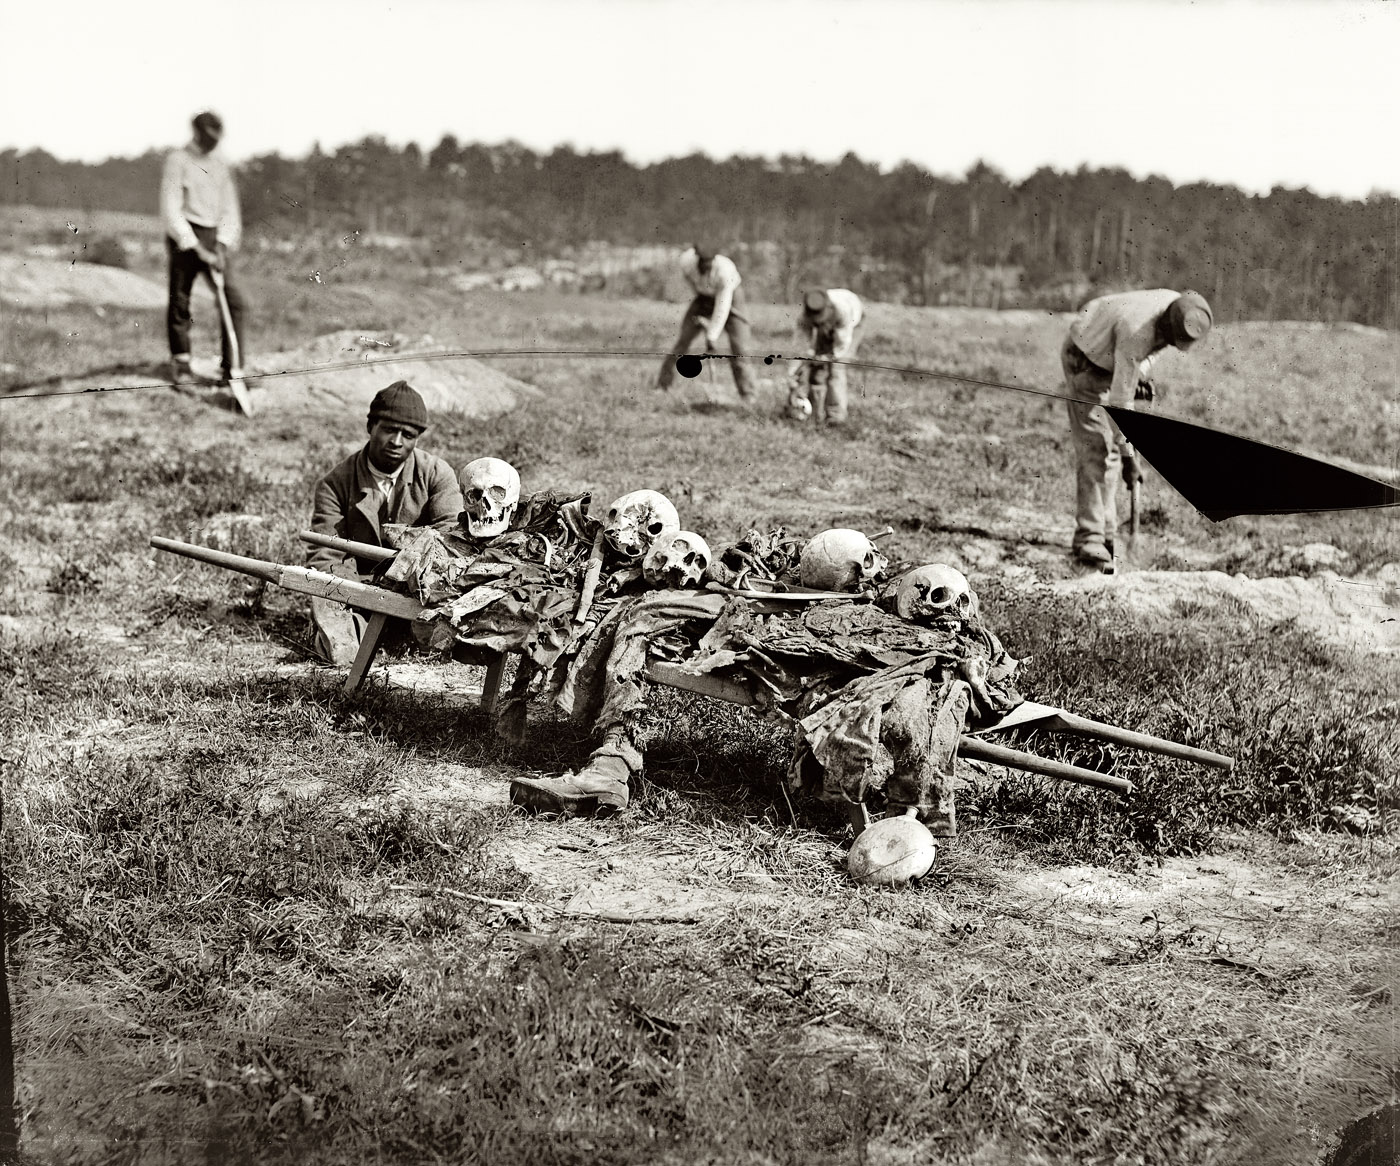 April 1865. "Cold Harbor, Va. Collecting bones of soldiers killed in the battle." Photograph from the main Eastern theater of war, Grant's Wilderness Campaign, May-June 1864. Wet plate glass negative by John Reekie. View full size.